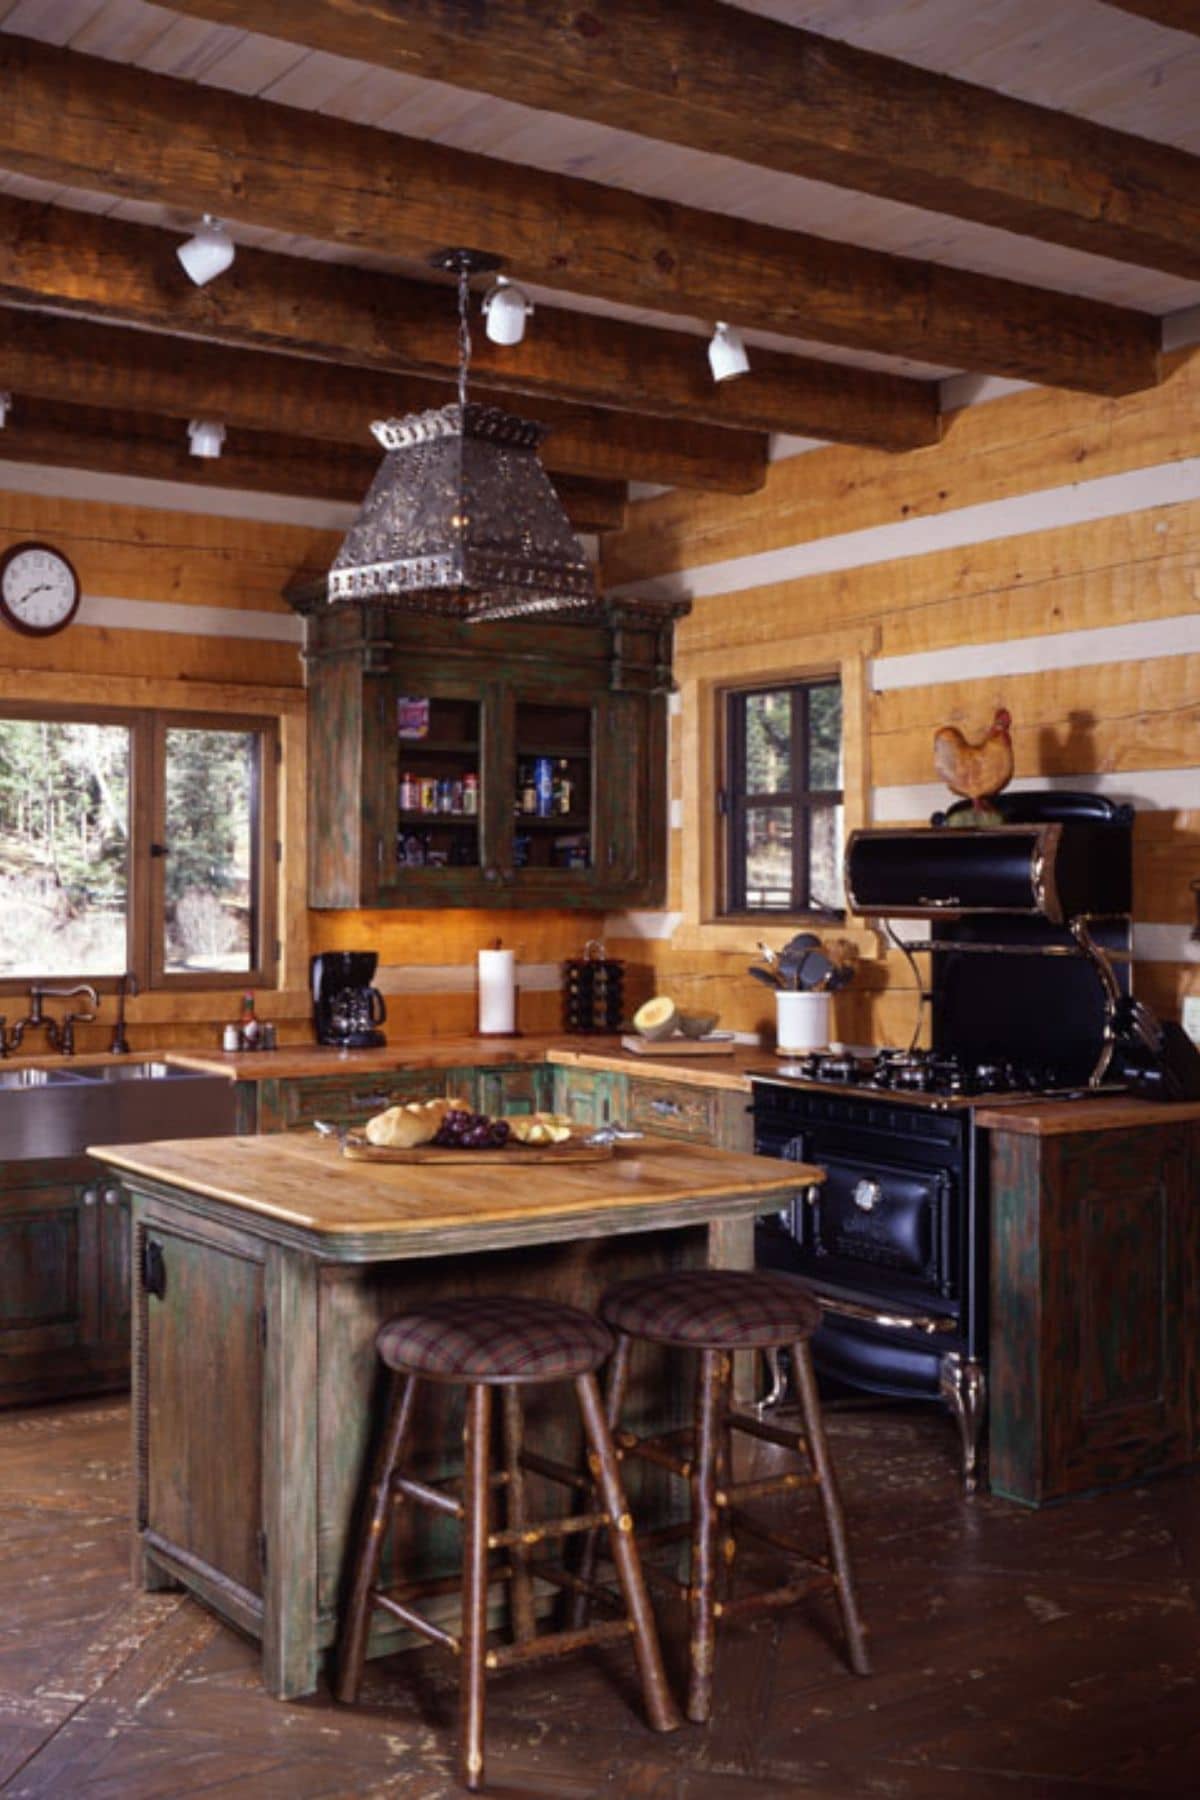 kitchen with vintage black stove and wooden island with stools